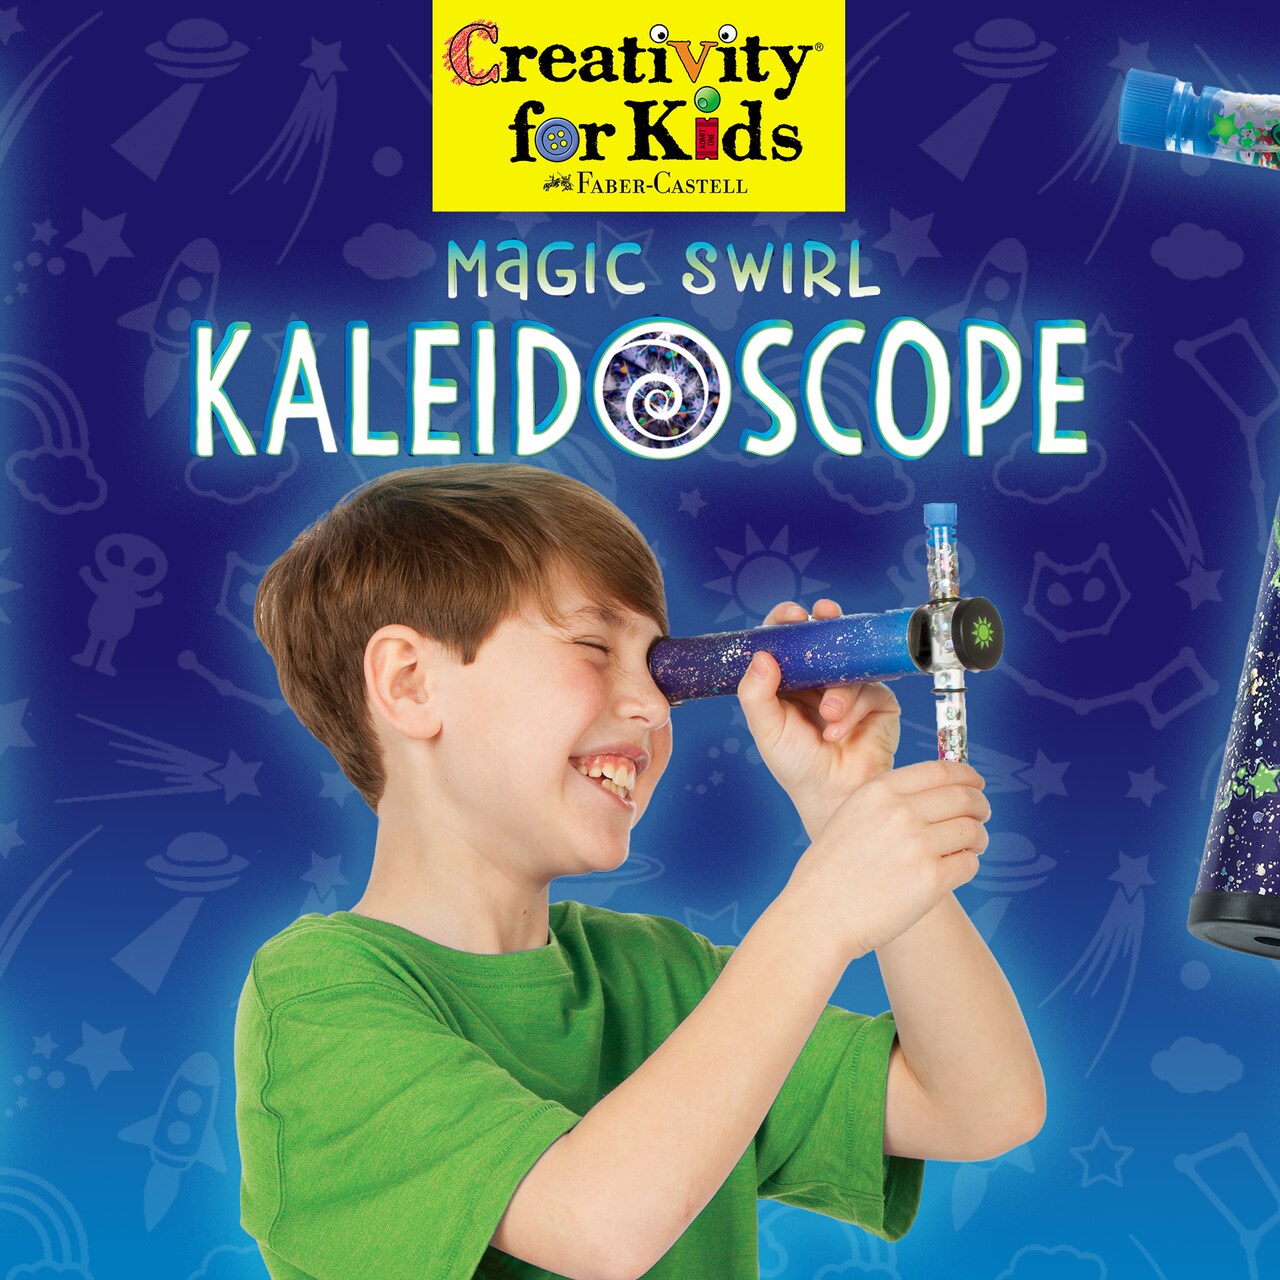 Kids Club Create an Out of this World Kaleidoscope